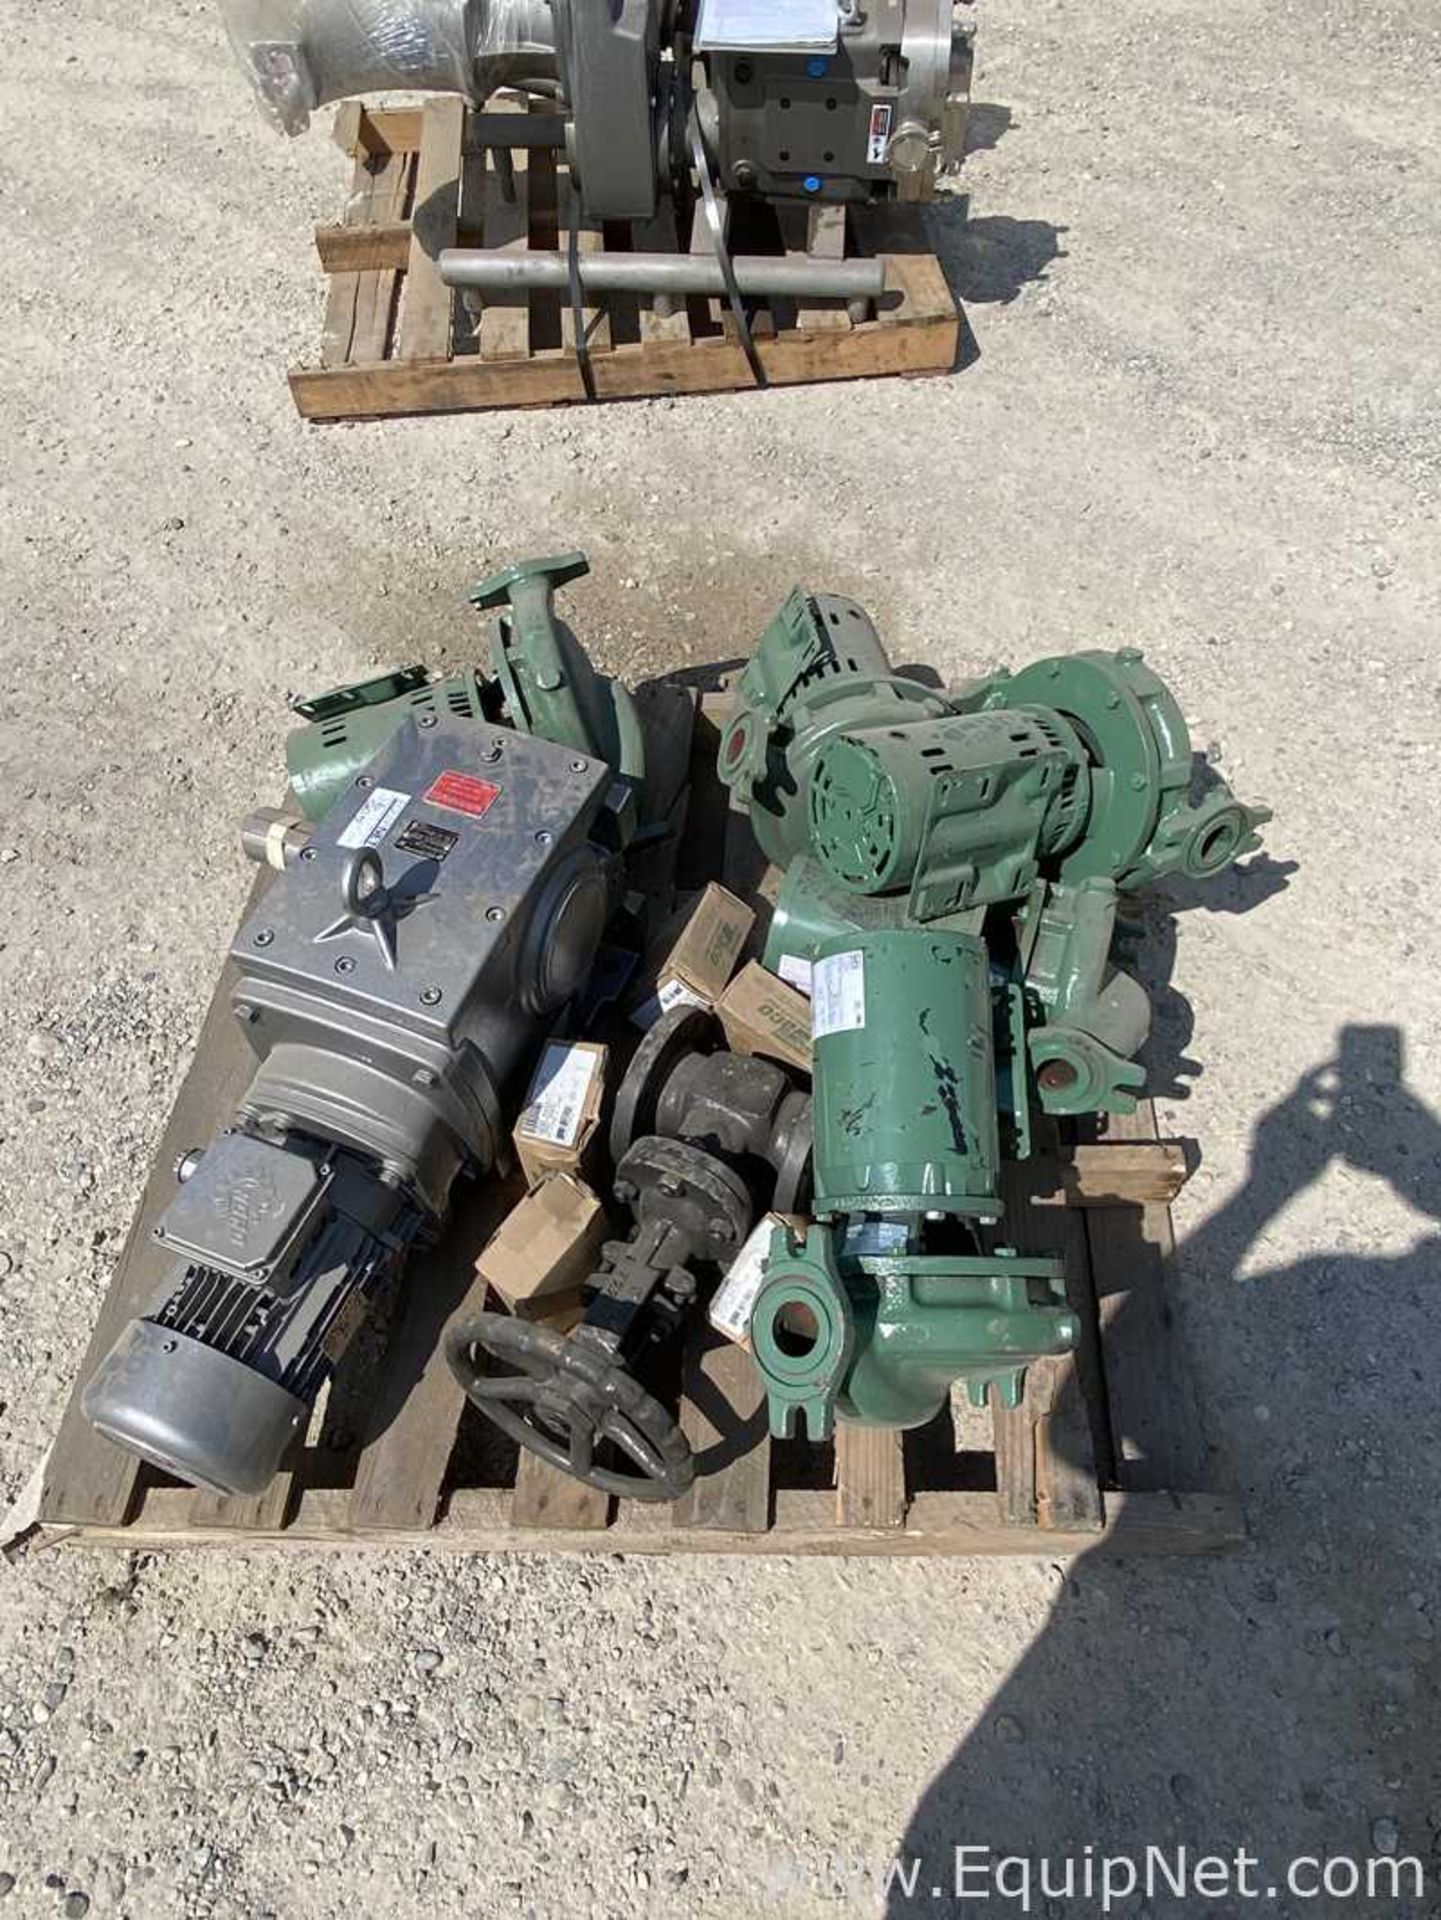 DESCRIPTION: Lot of 6 Centrifugal Pumps with Valve and DriveIncludes:6 x Taco 11-16 Pumps, 575 V, 60 - Image 13 of 13